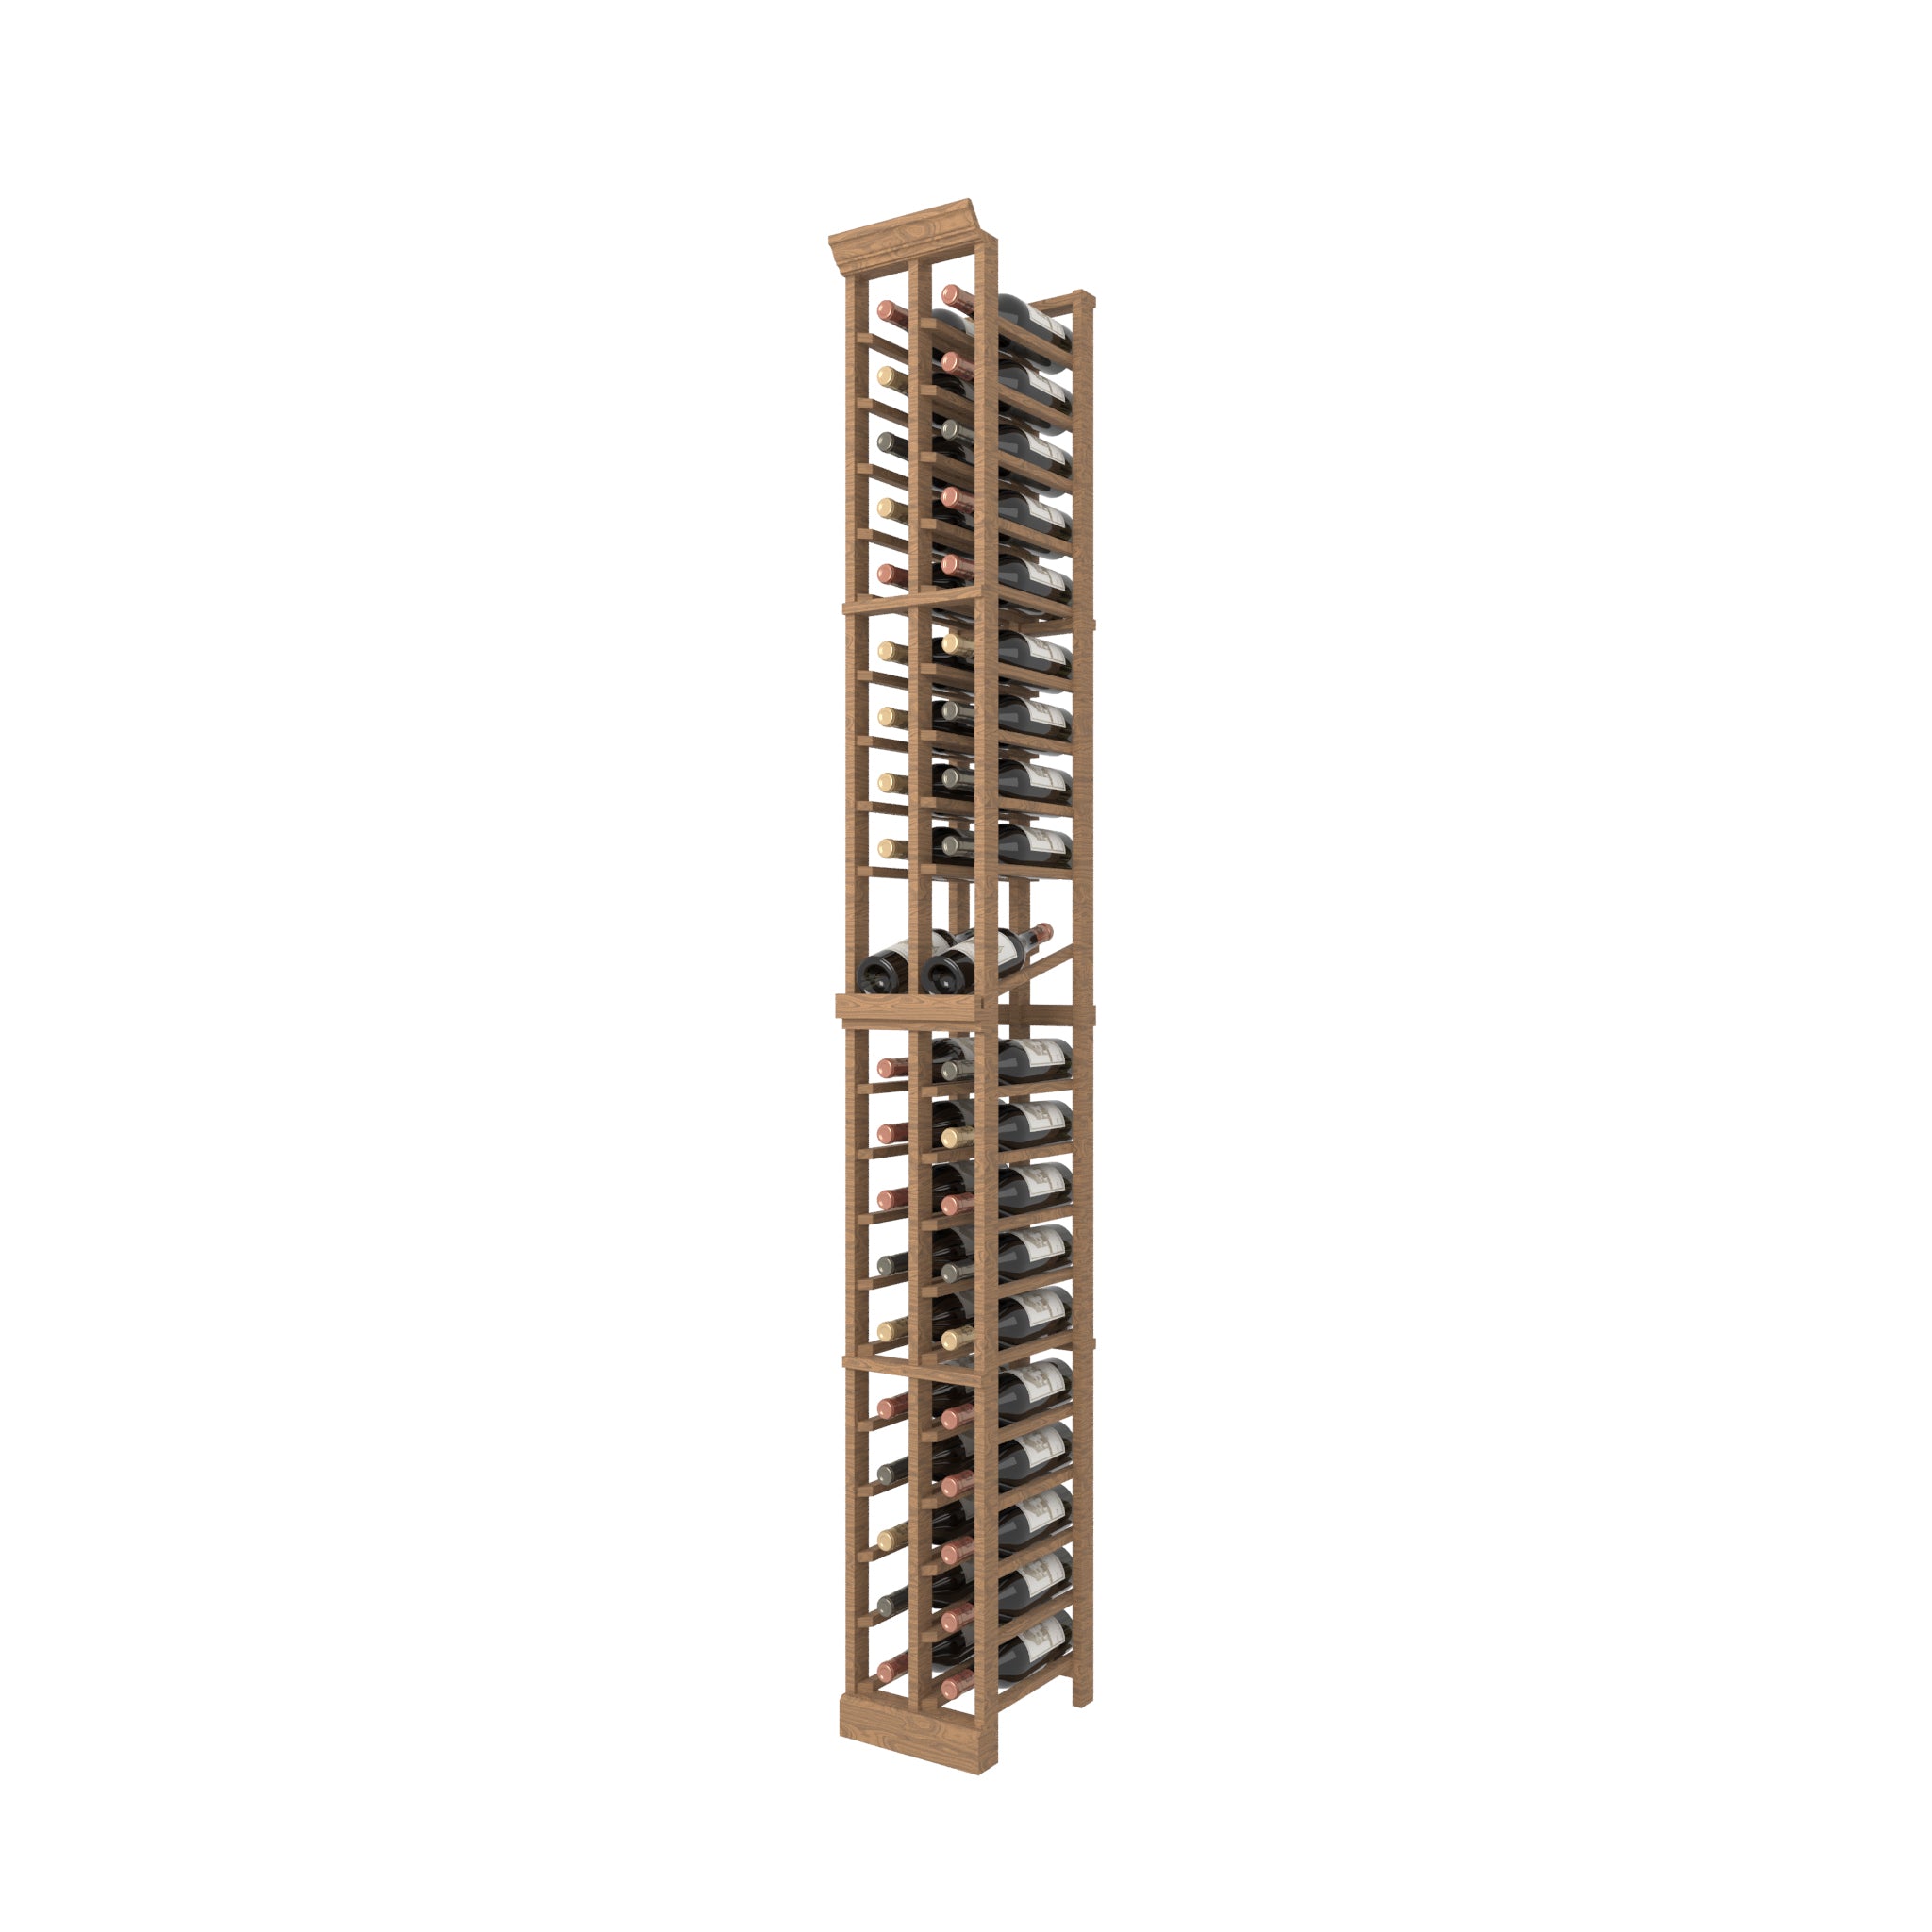 Individual full bottle wood Wine Rack with a display row - 02 Column